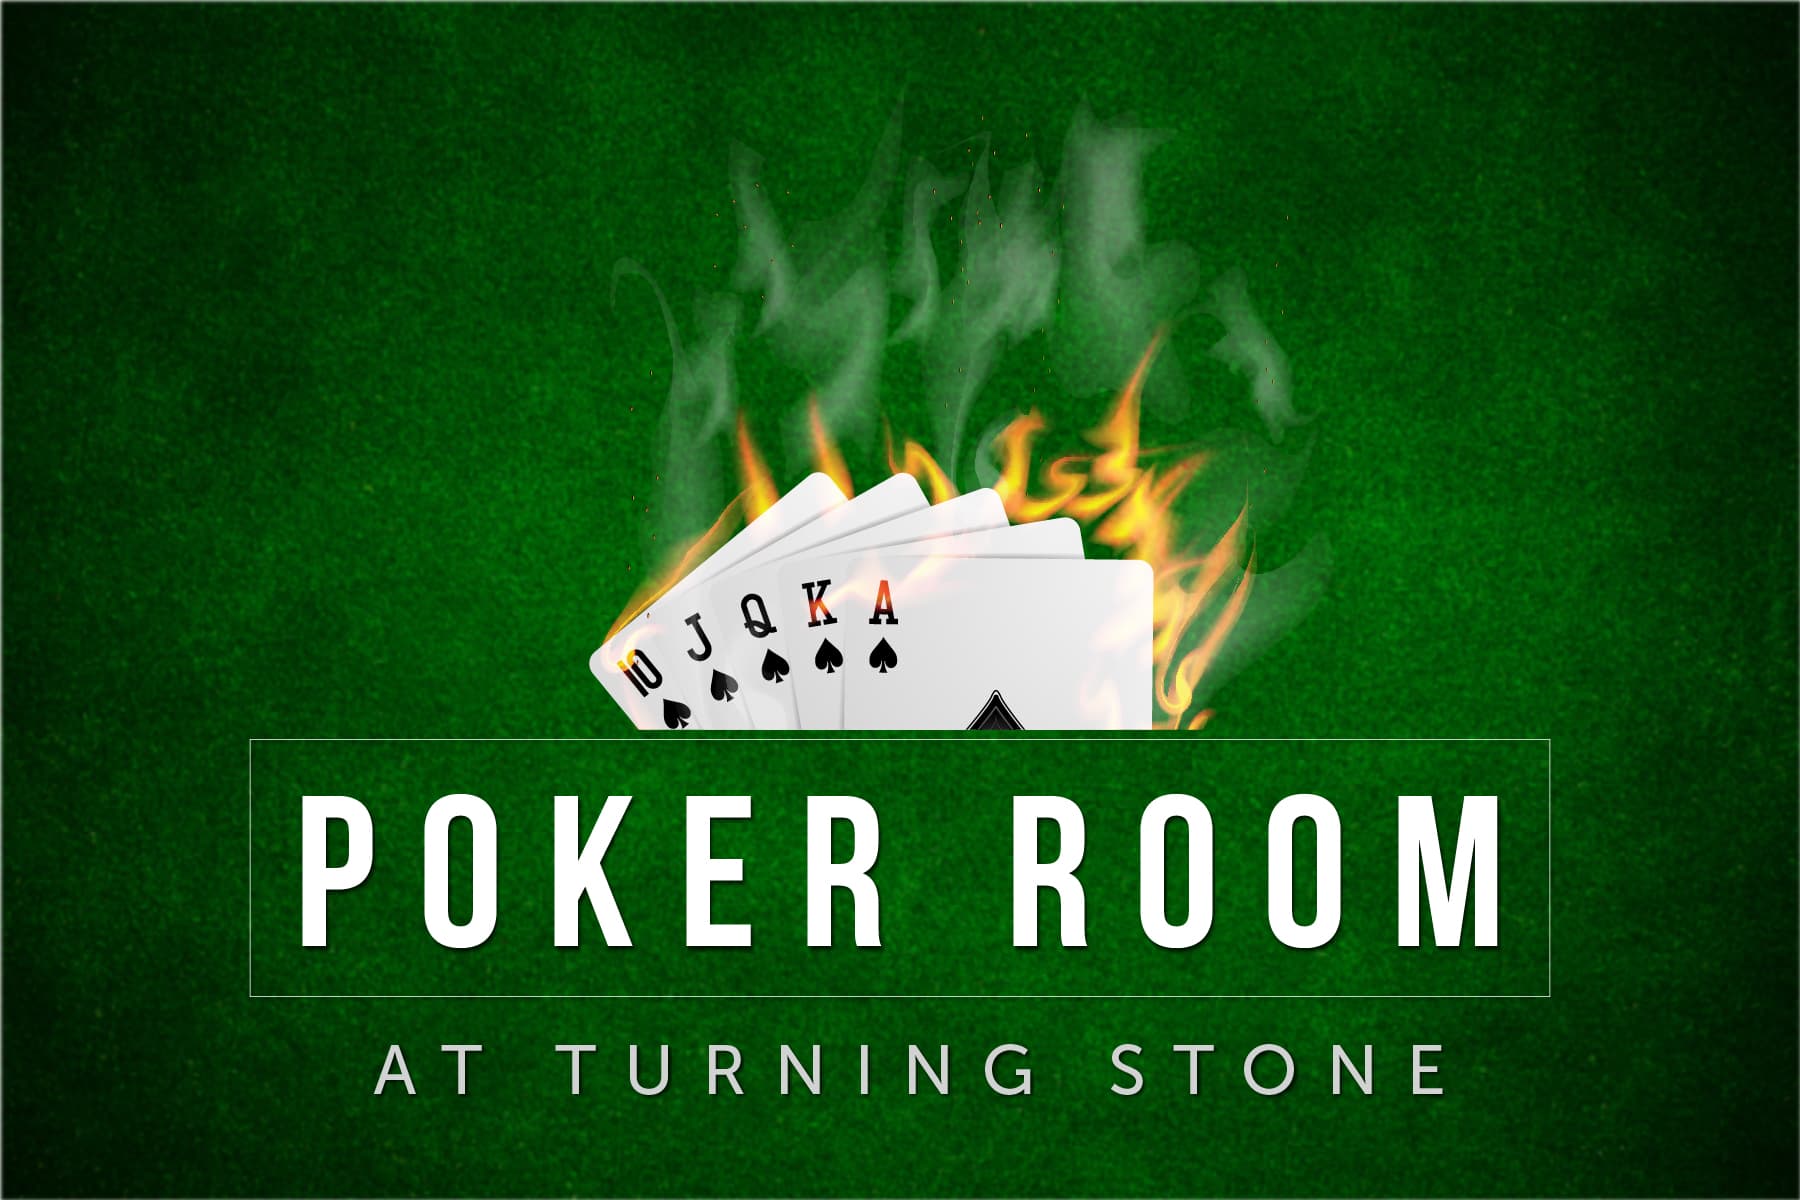 Texas Hold 'em Rules - How to play Texas Hold 'em